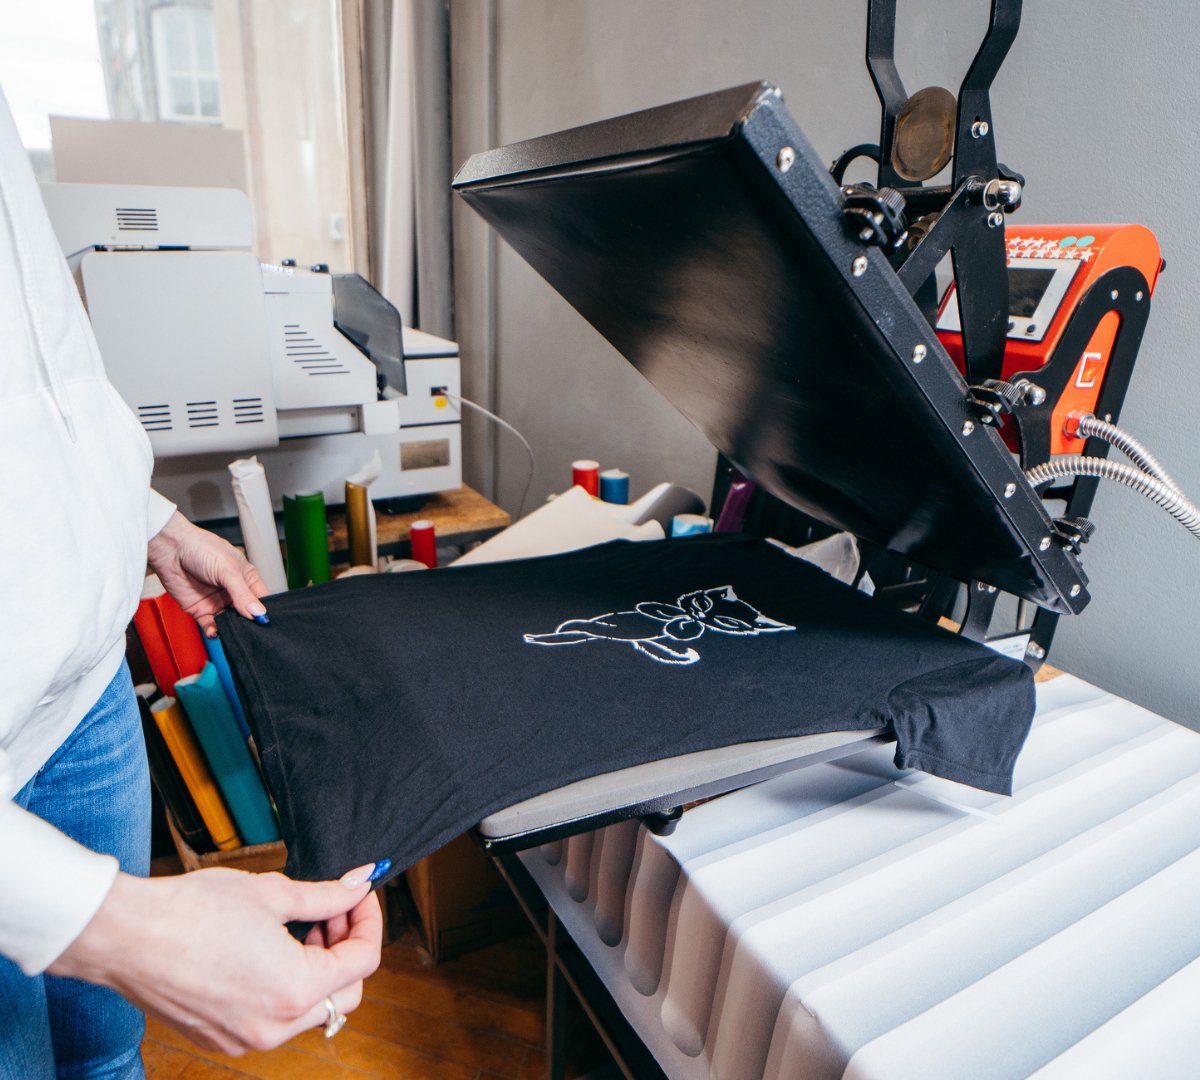 6 Tips and Tricks to Make Heat-Press Decorating on T-Shirts Easier at Home - Threadsy